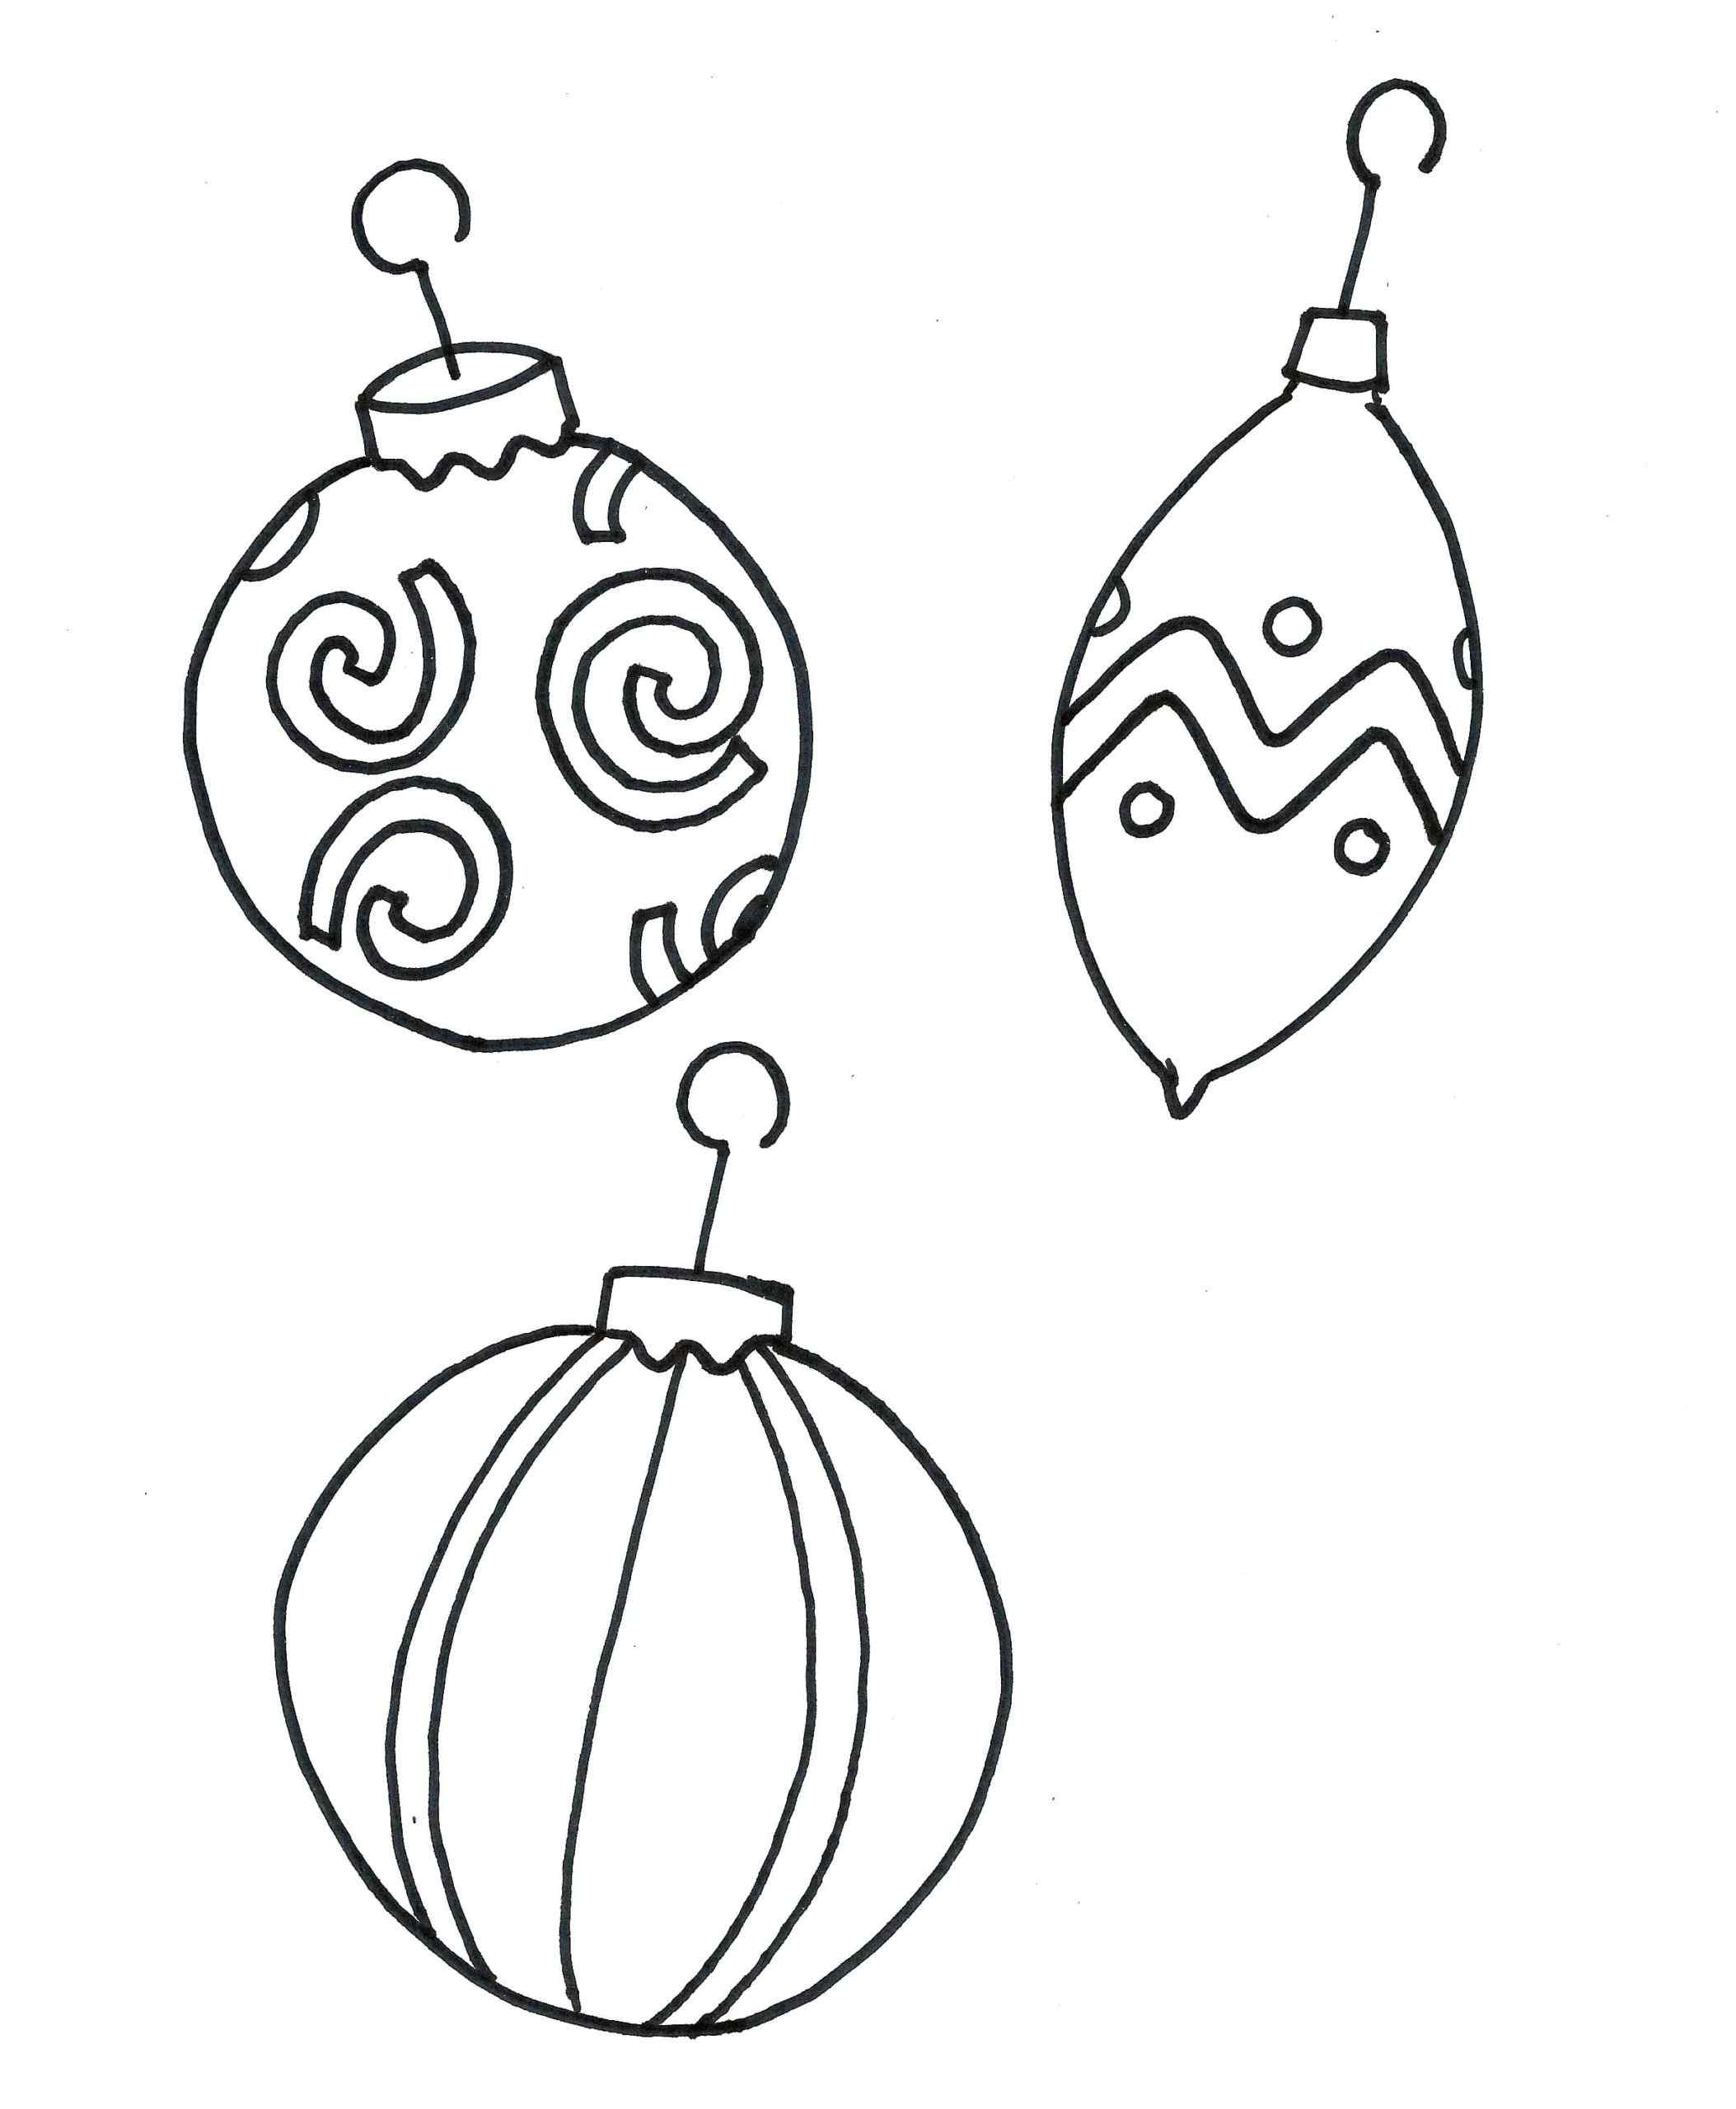 Christmas Tree Decorations Of Different Shapes Coloring Page